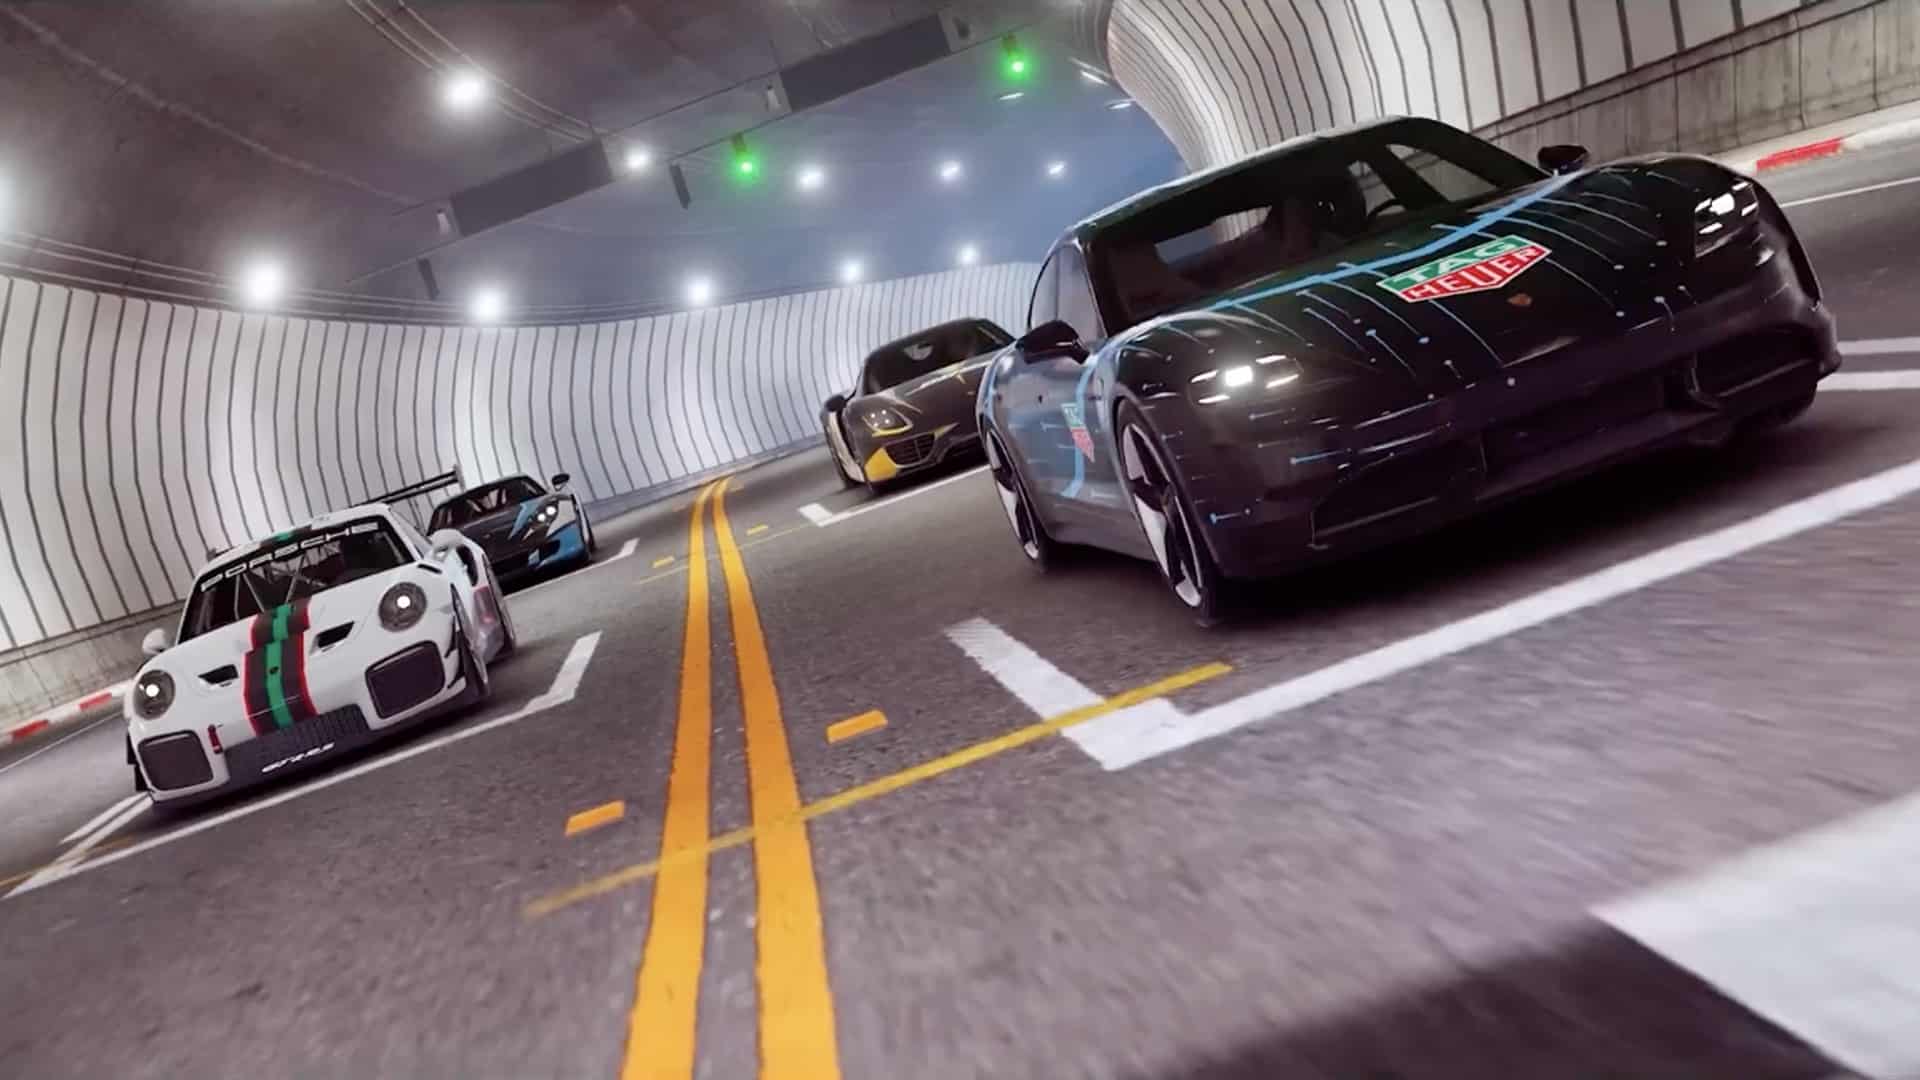 Get Asphalt 9: Legends On PC: Here's What You Need To Do